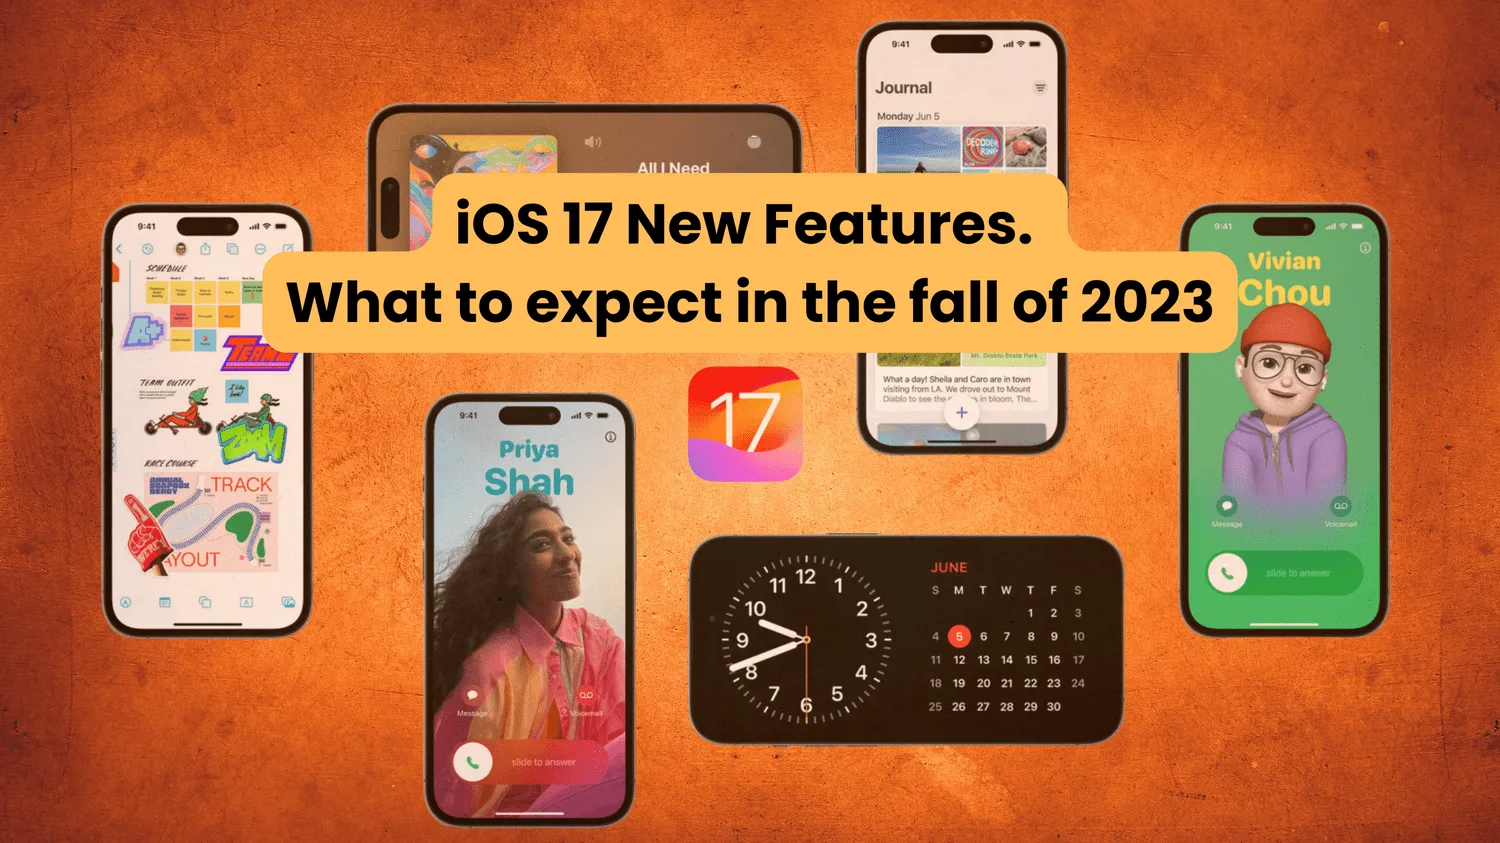 New features iOS 17 image